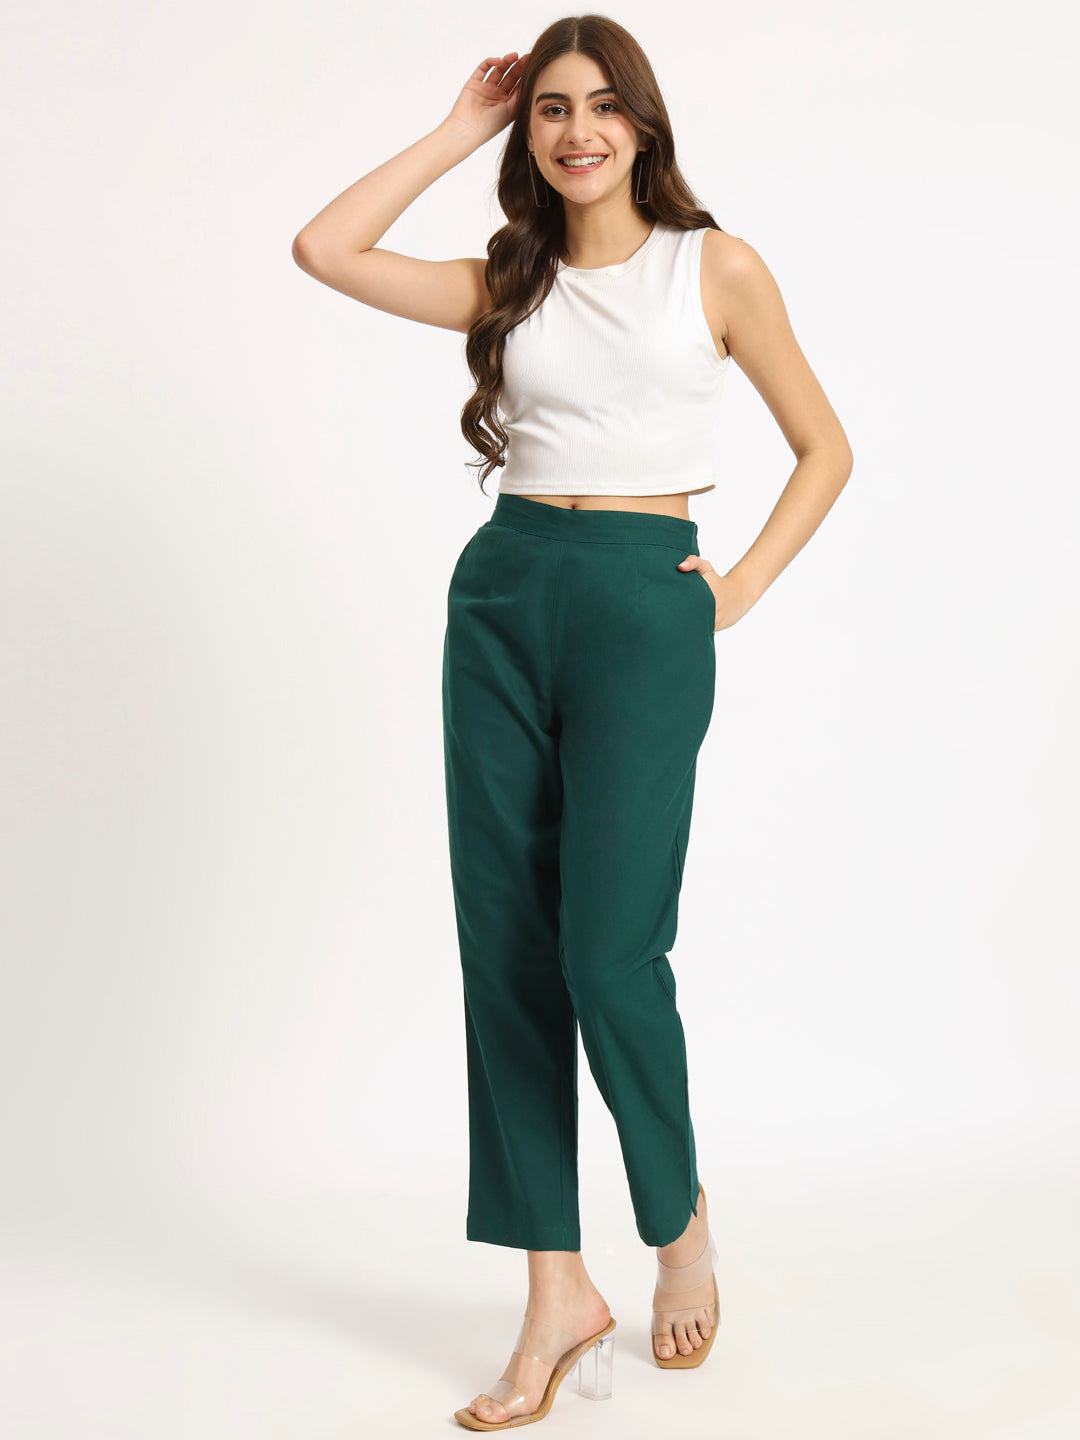 Bottle Green Color Pants | Upto 25% Off – Reccy